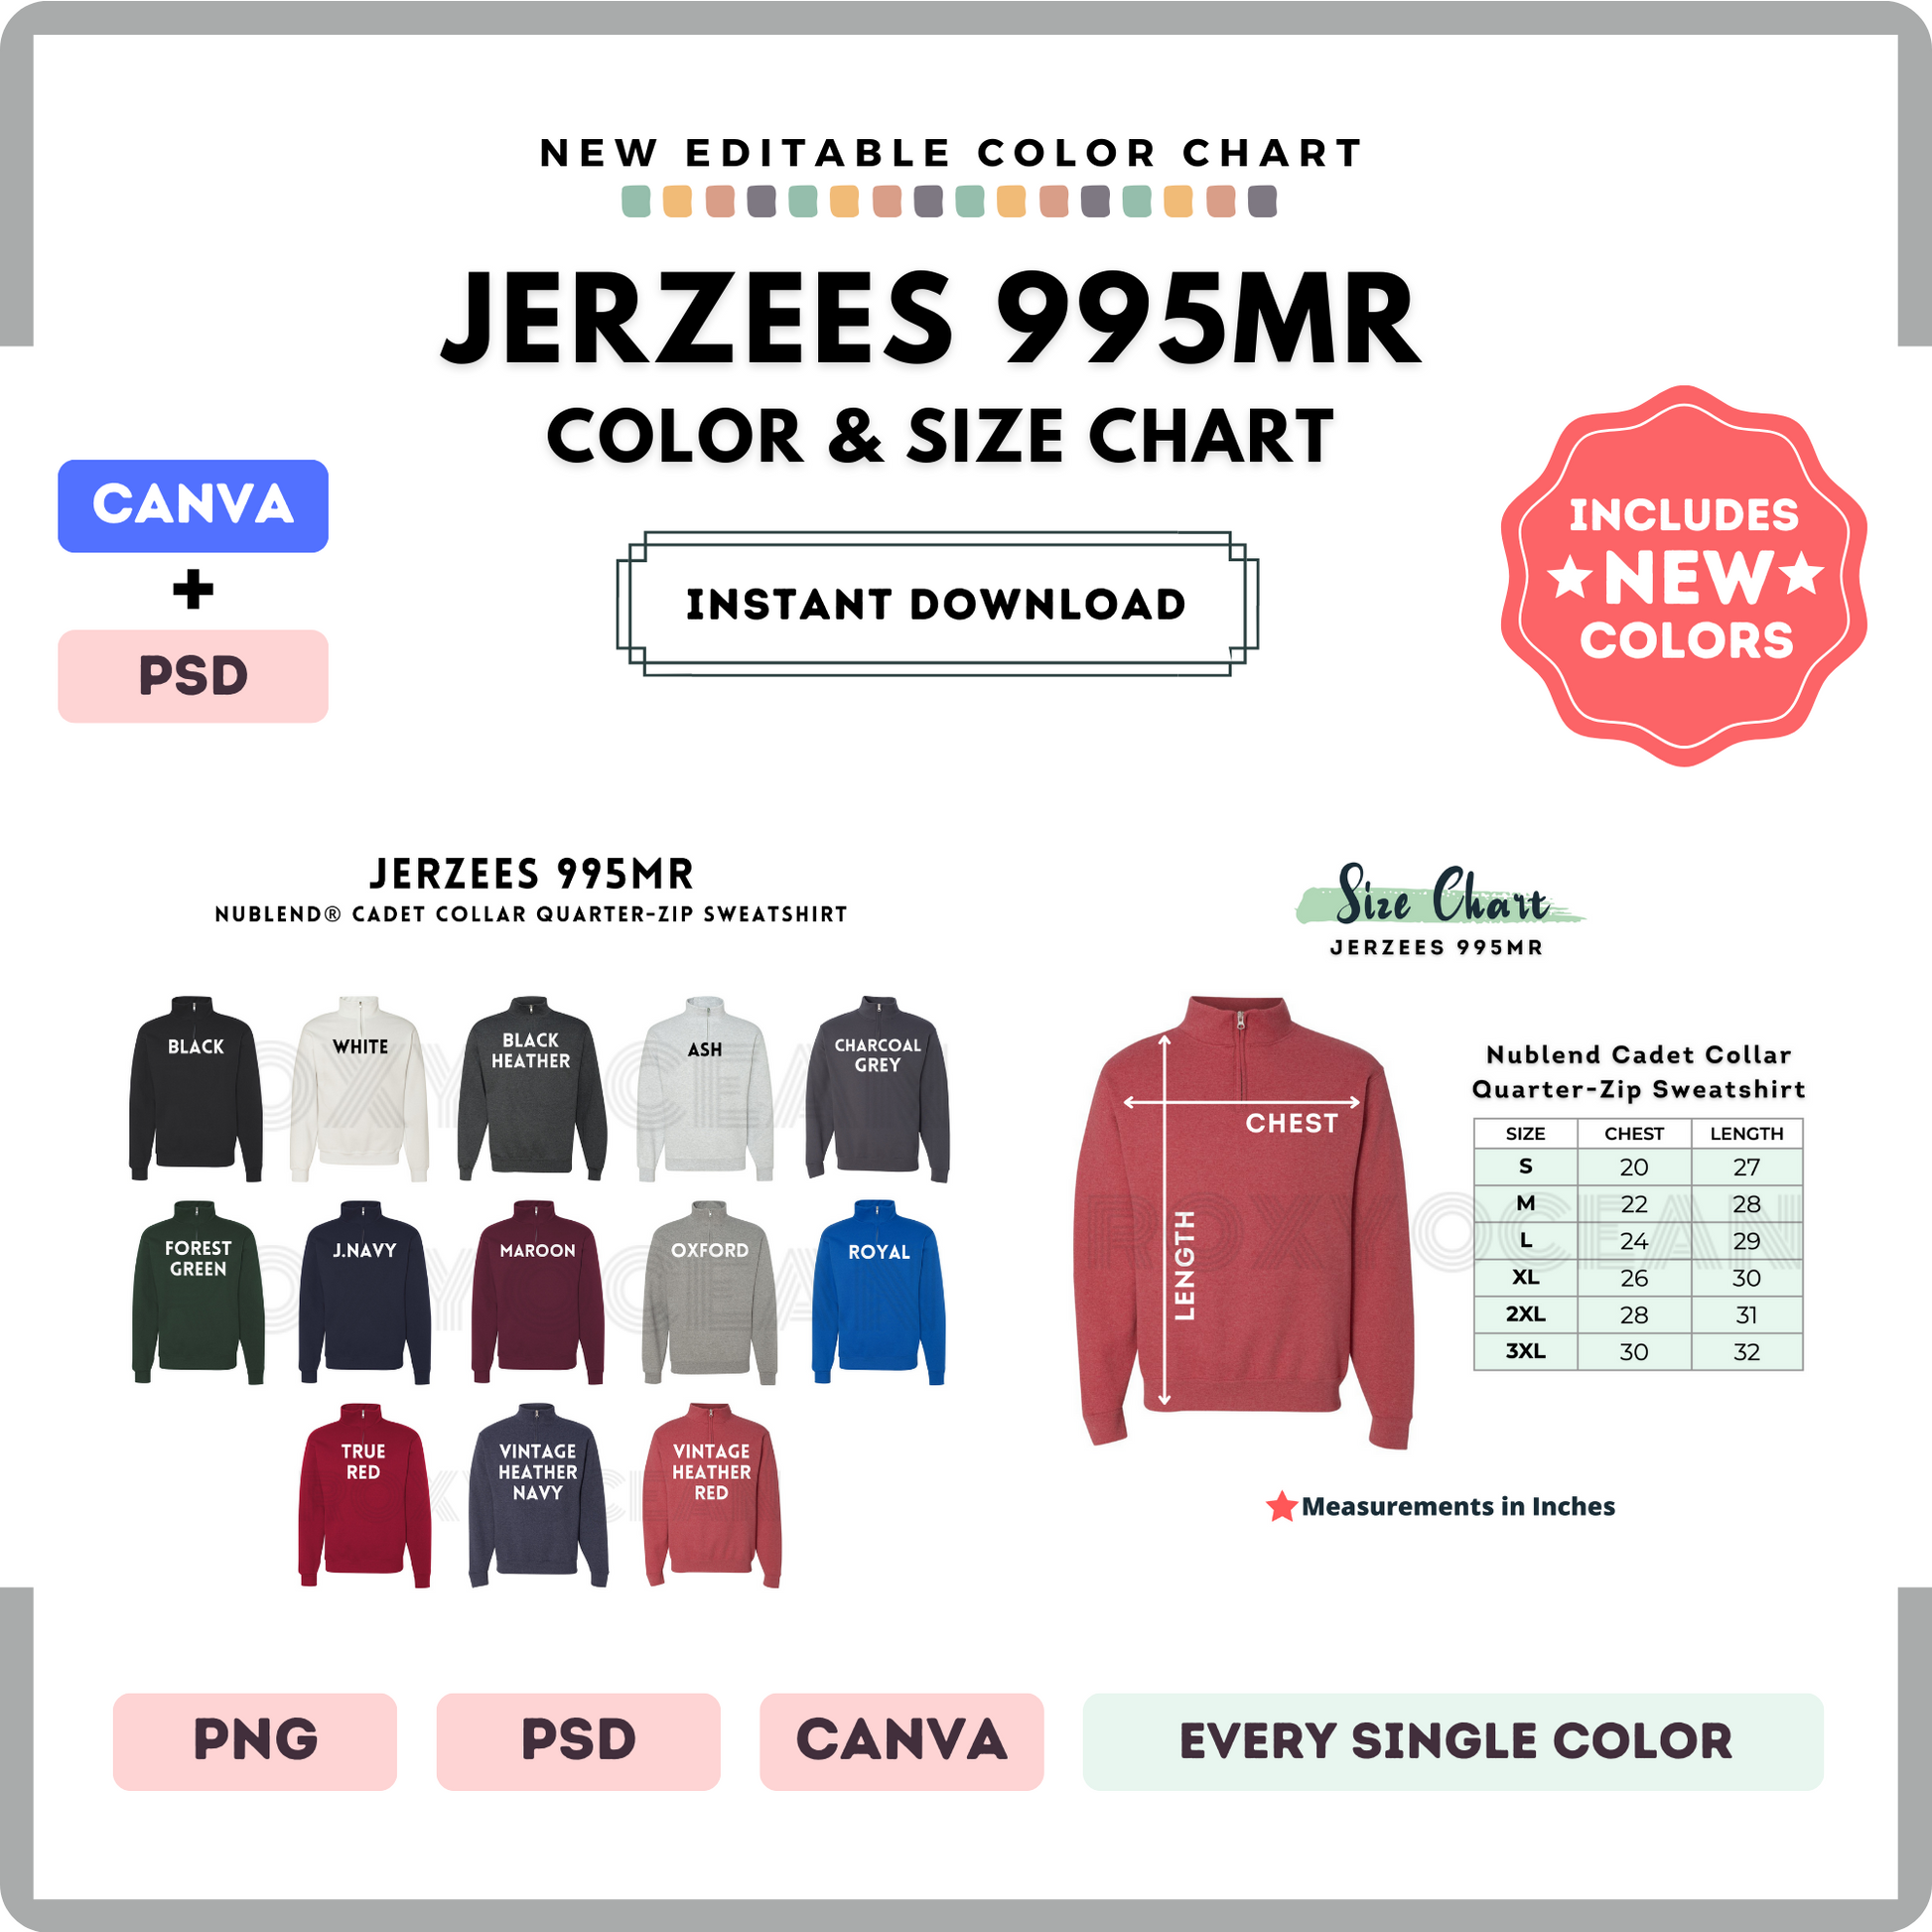 Jerzees 995MR Color and Size Chart